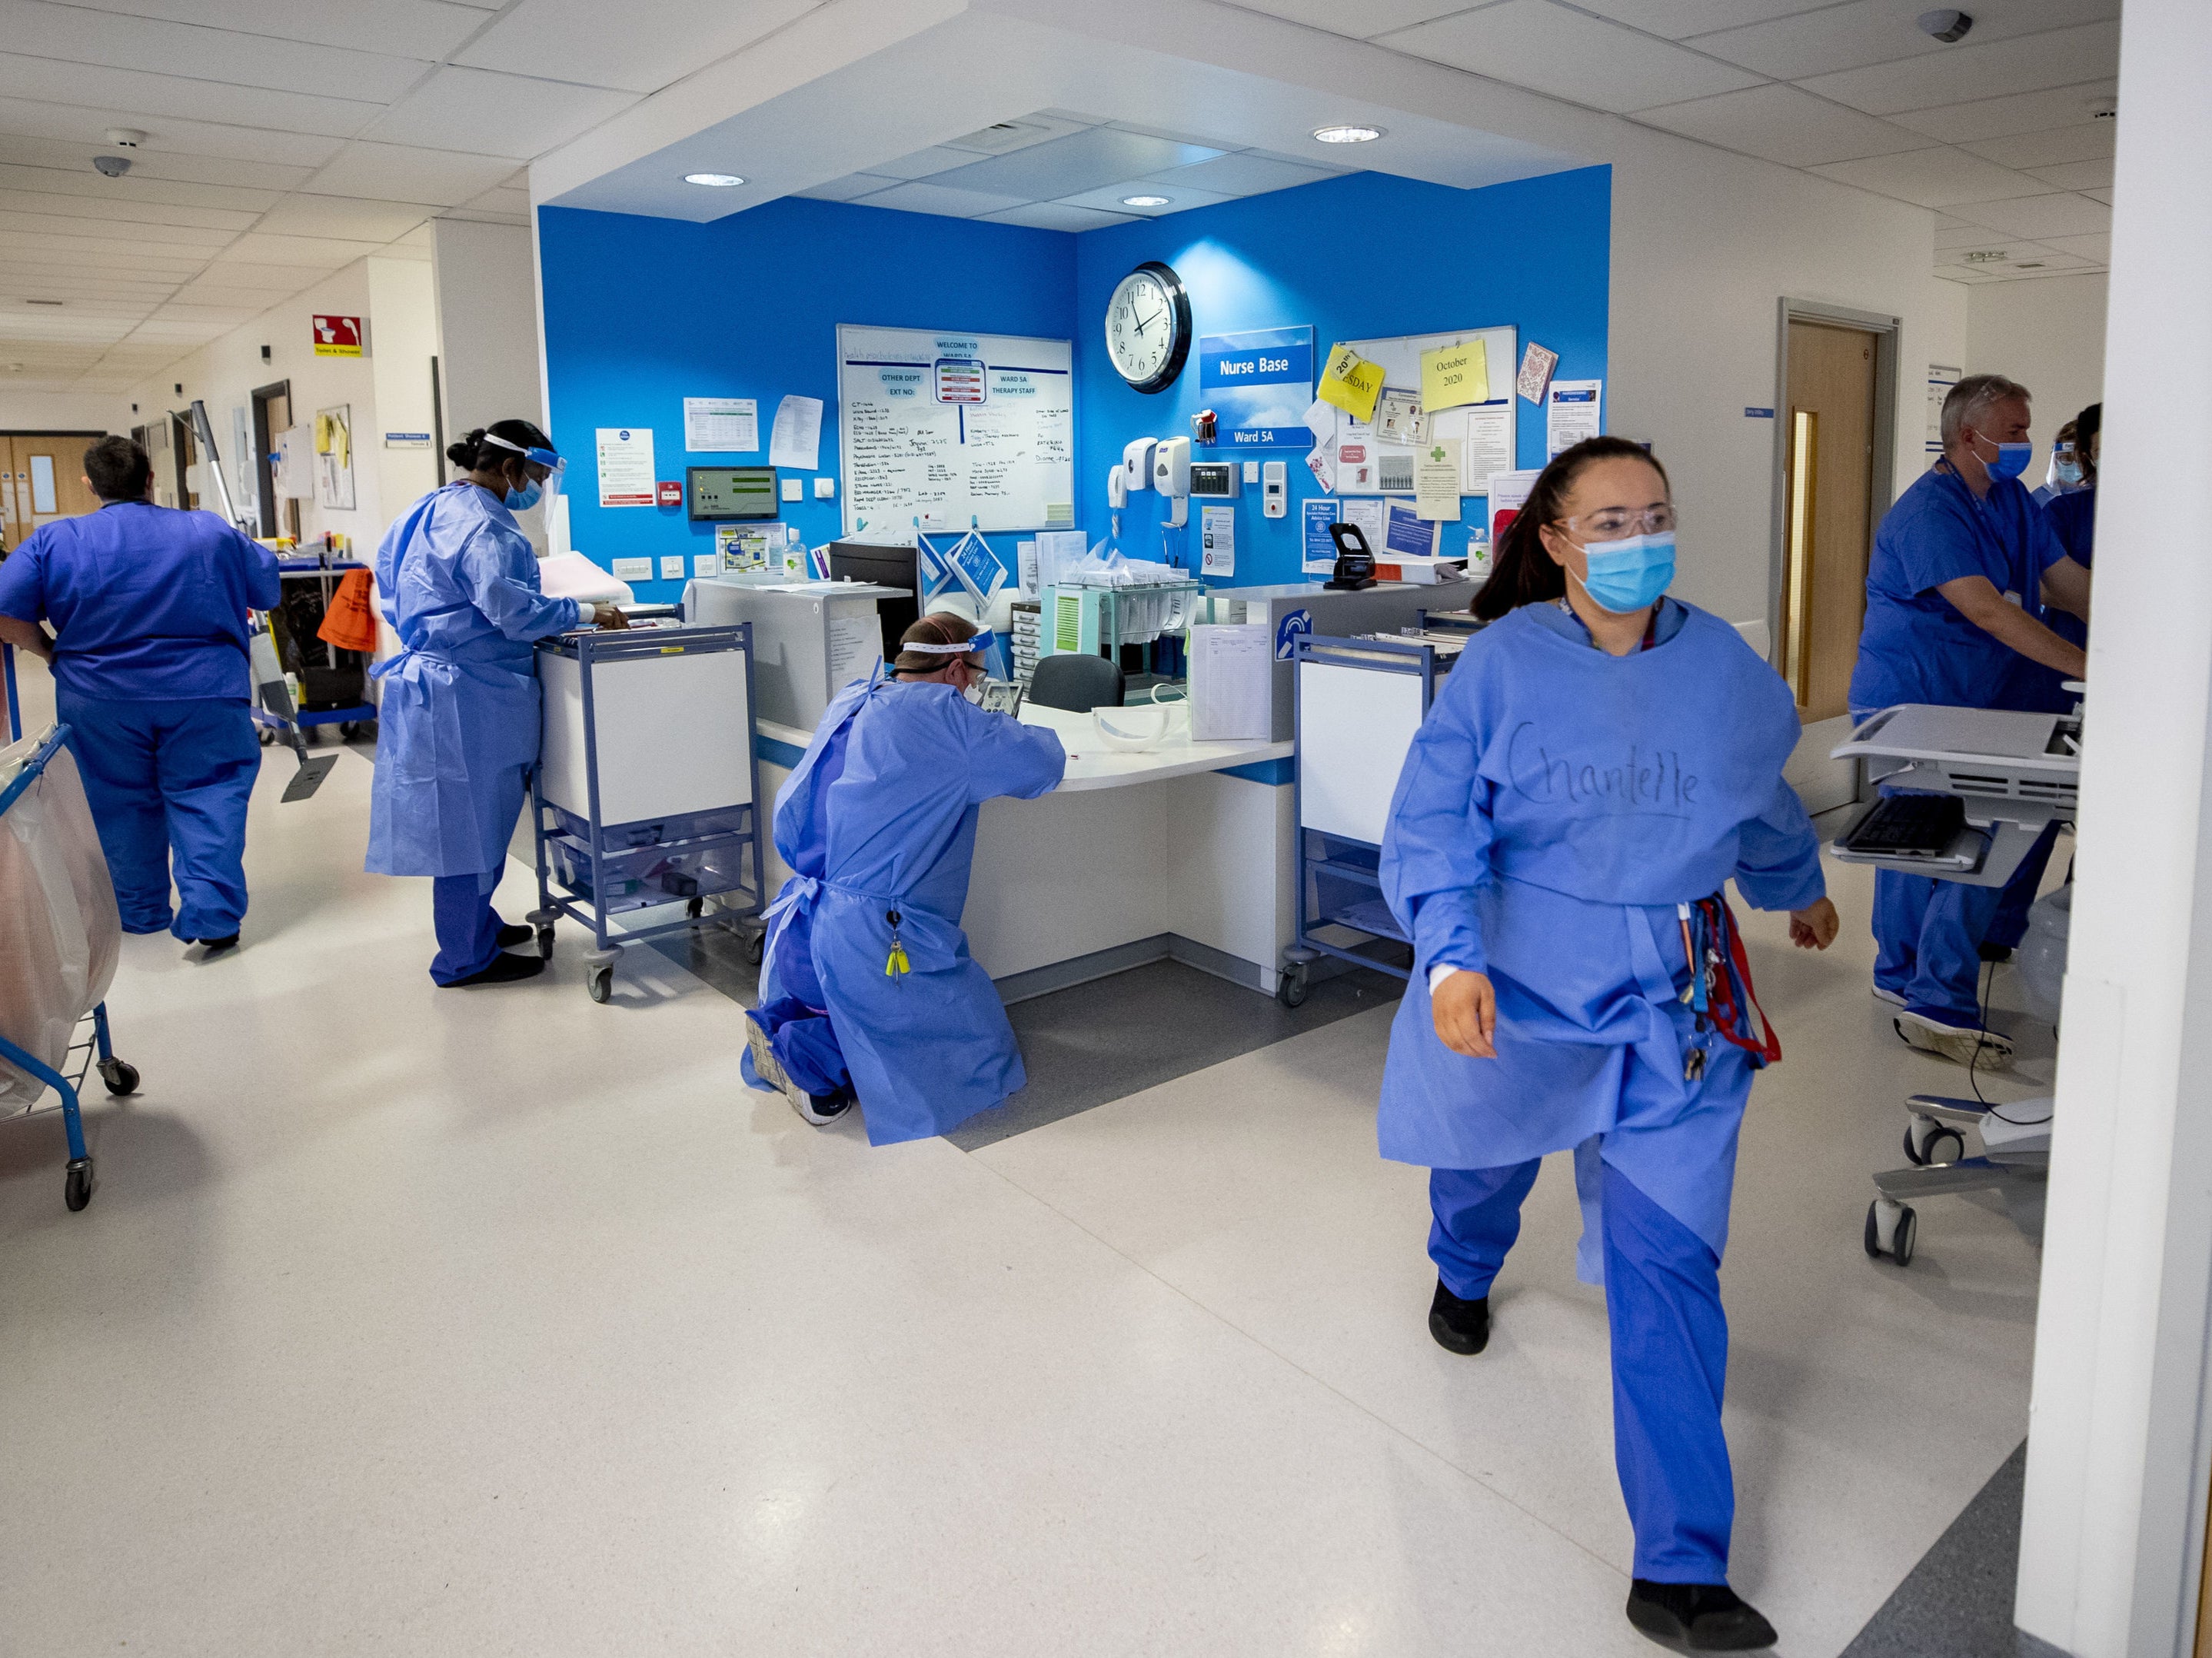 Almost 700 anaesthetists have been told they won’t have training jobs in the NHS after August